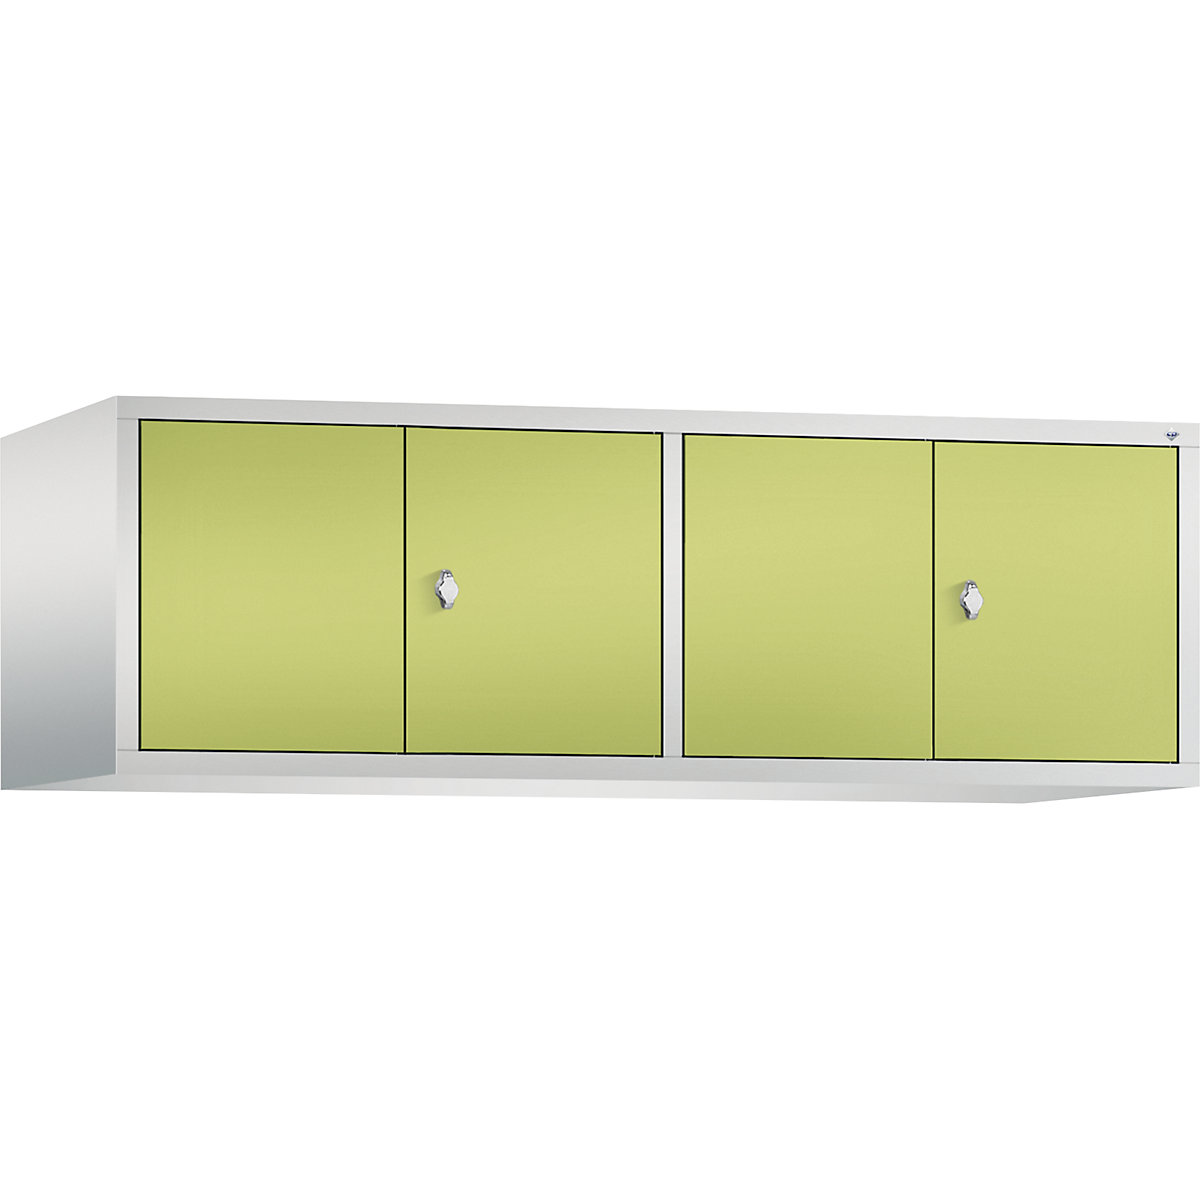 CLASSIC add-on cupboard, doors close in the middle – C+P, 4 compartments, compartment width 400 mm, light grey / viridian green-12